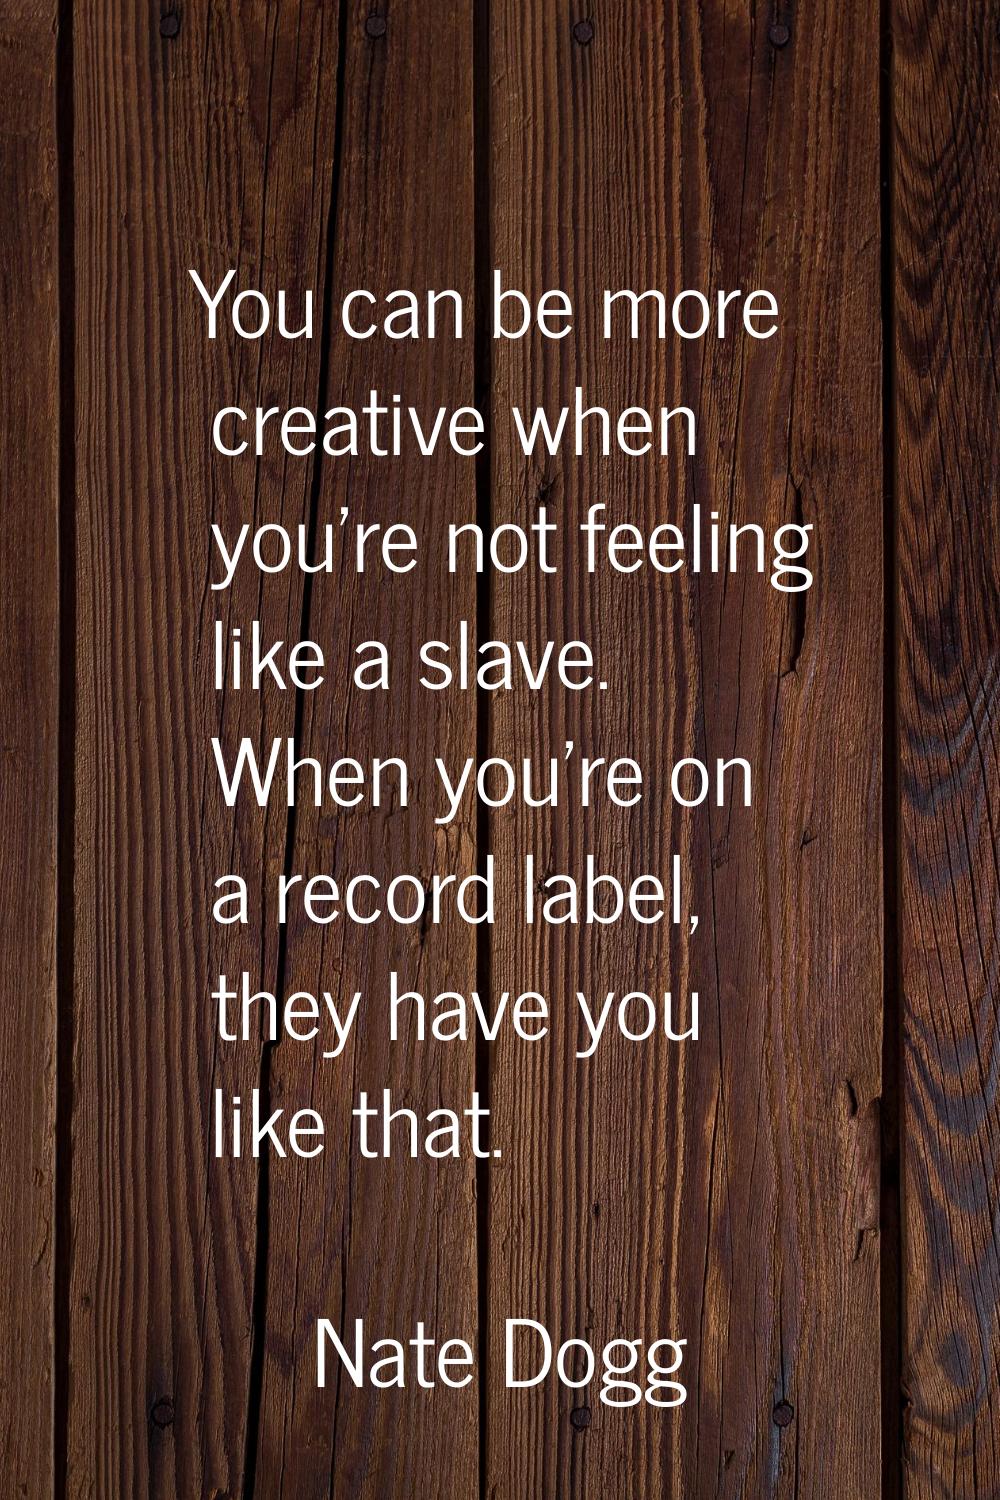 You can be more creative when you're not feeling like a slave. When you're on a record label, they 